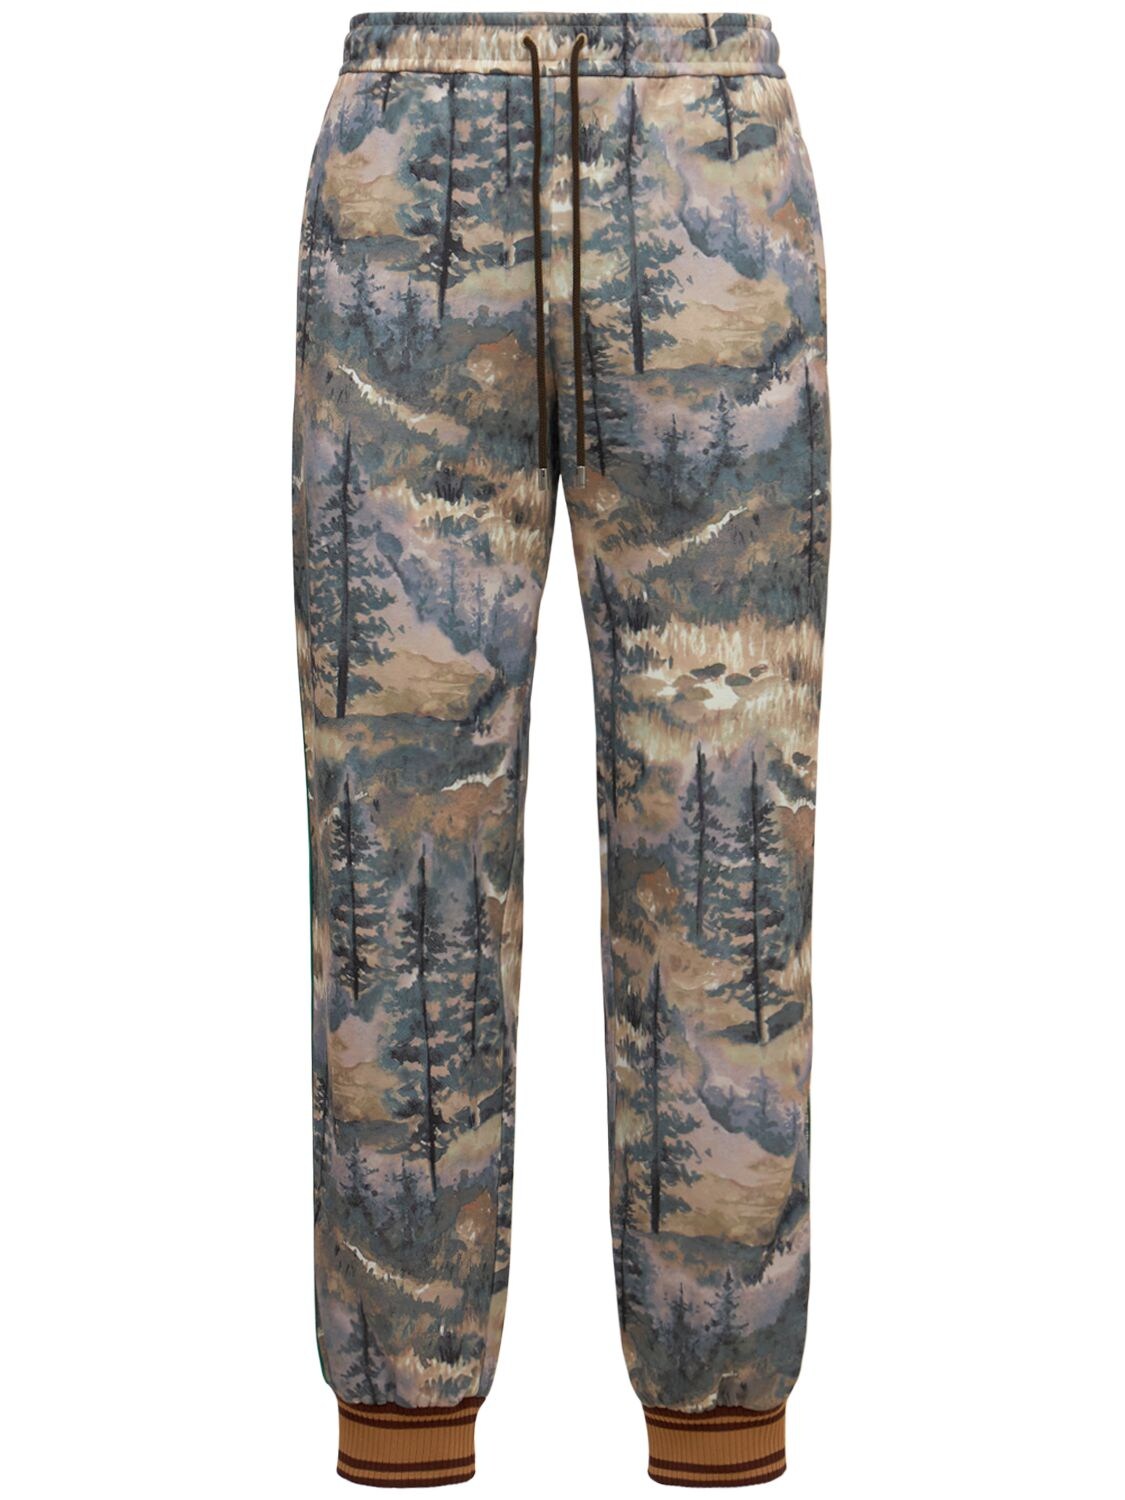 GUCCI X THE NORTH FACE FOREST PRINT JOG trousers,75IXBO084-MZIYOQ2